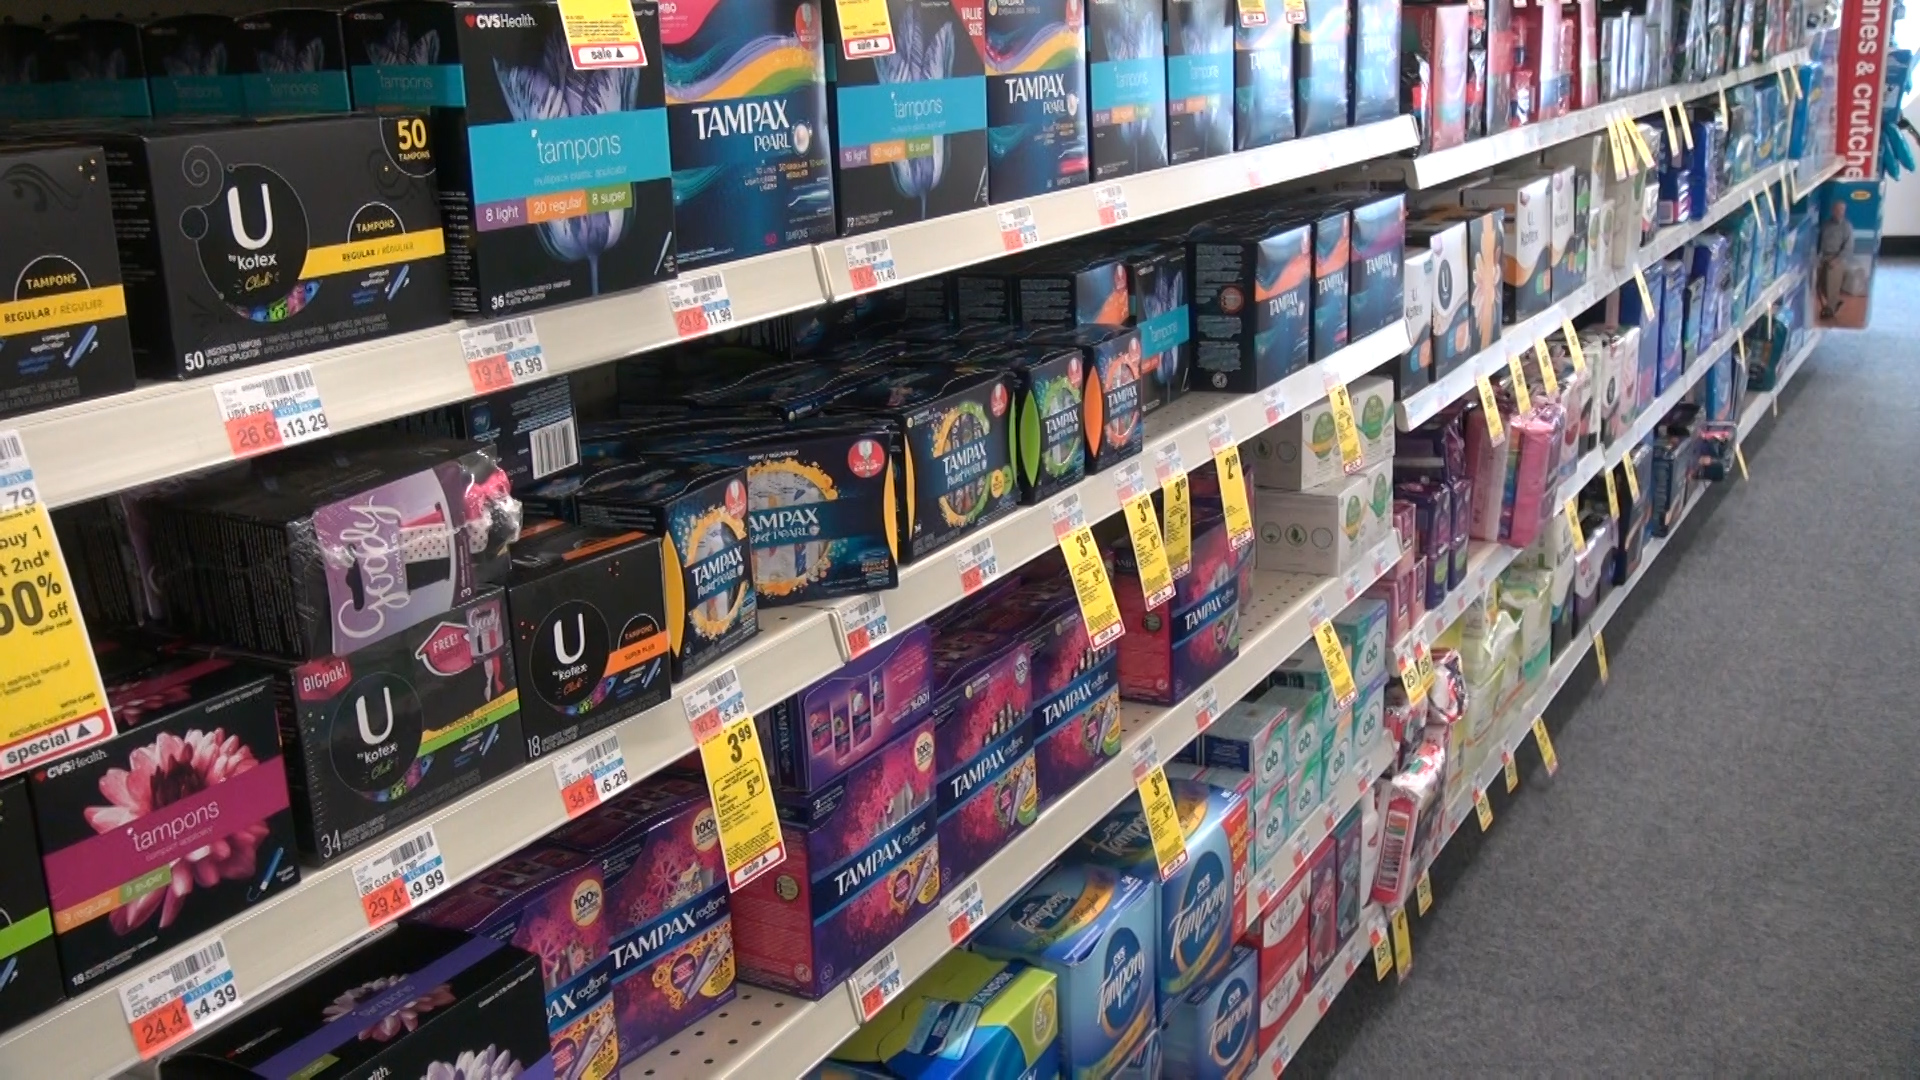 Tampon tax may get the boot in Washington